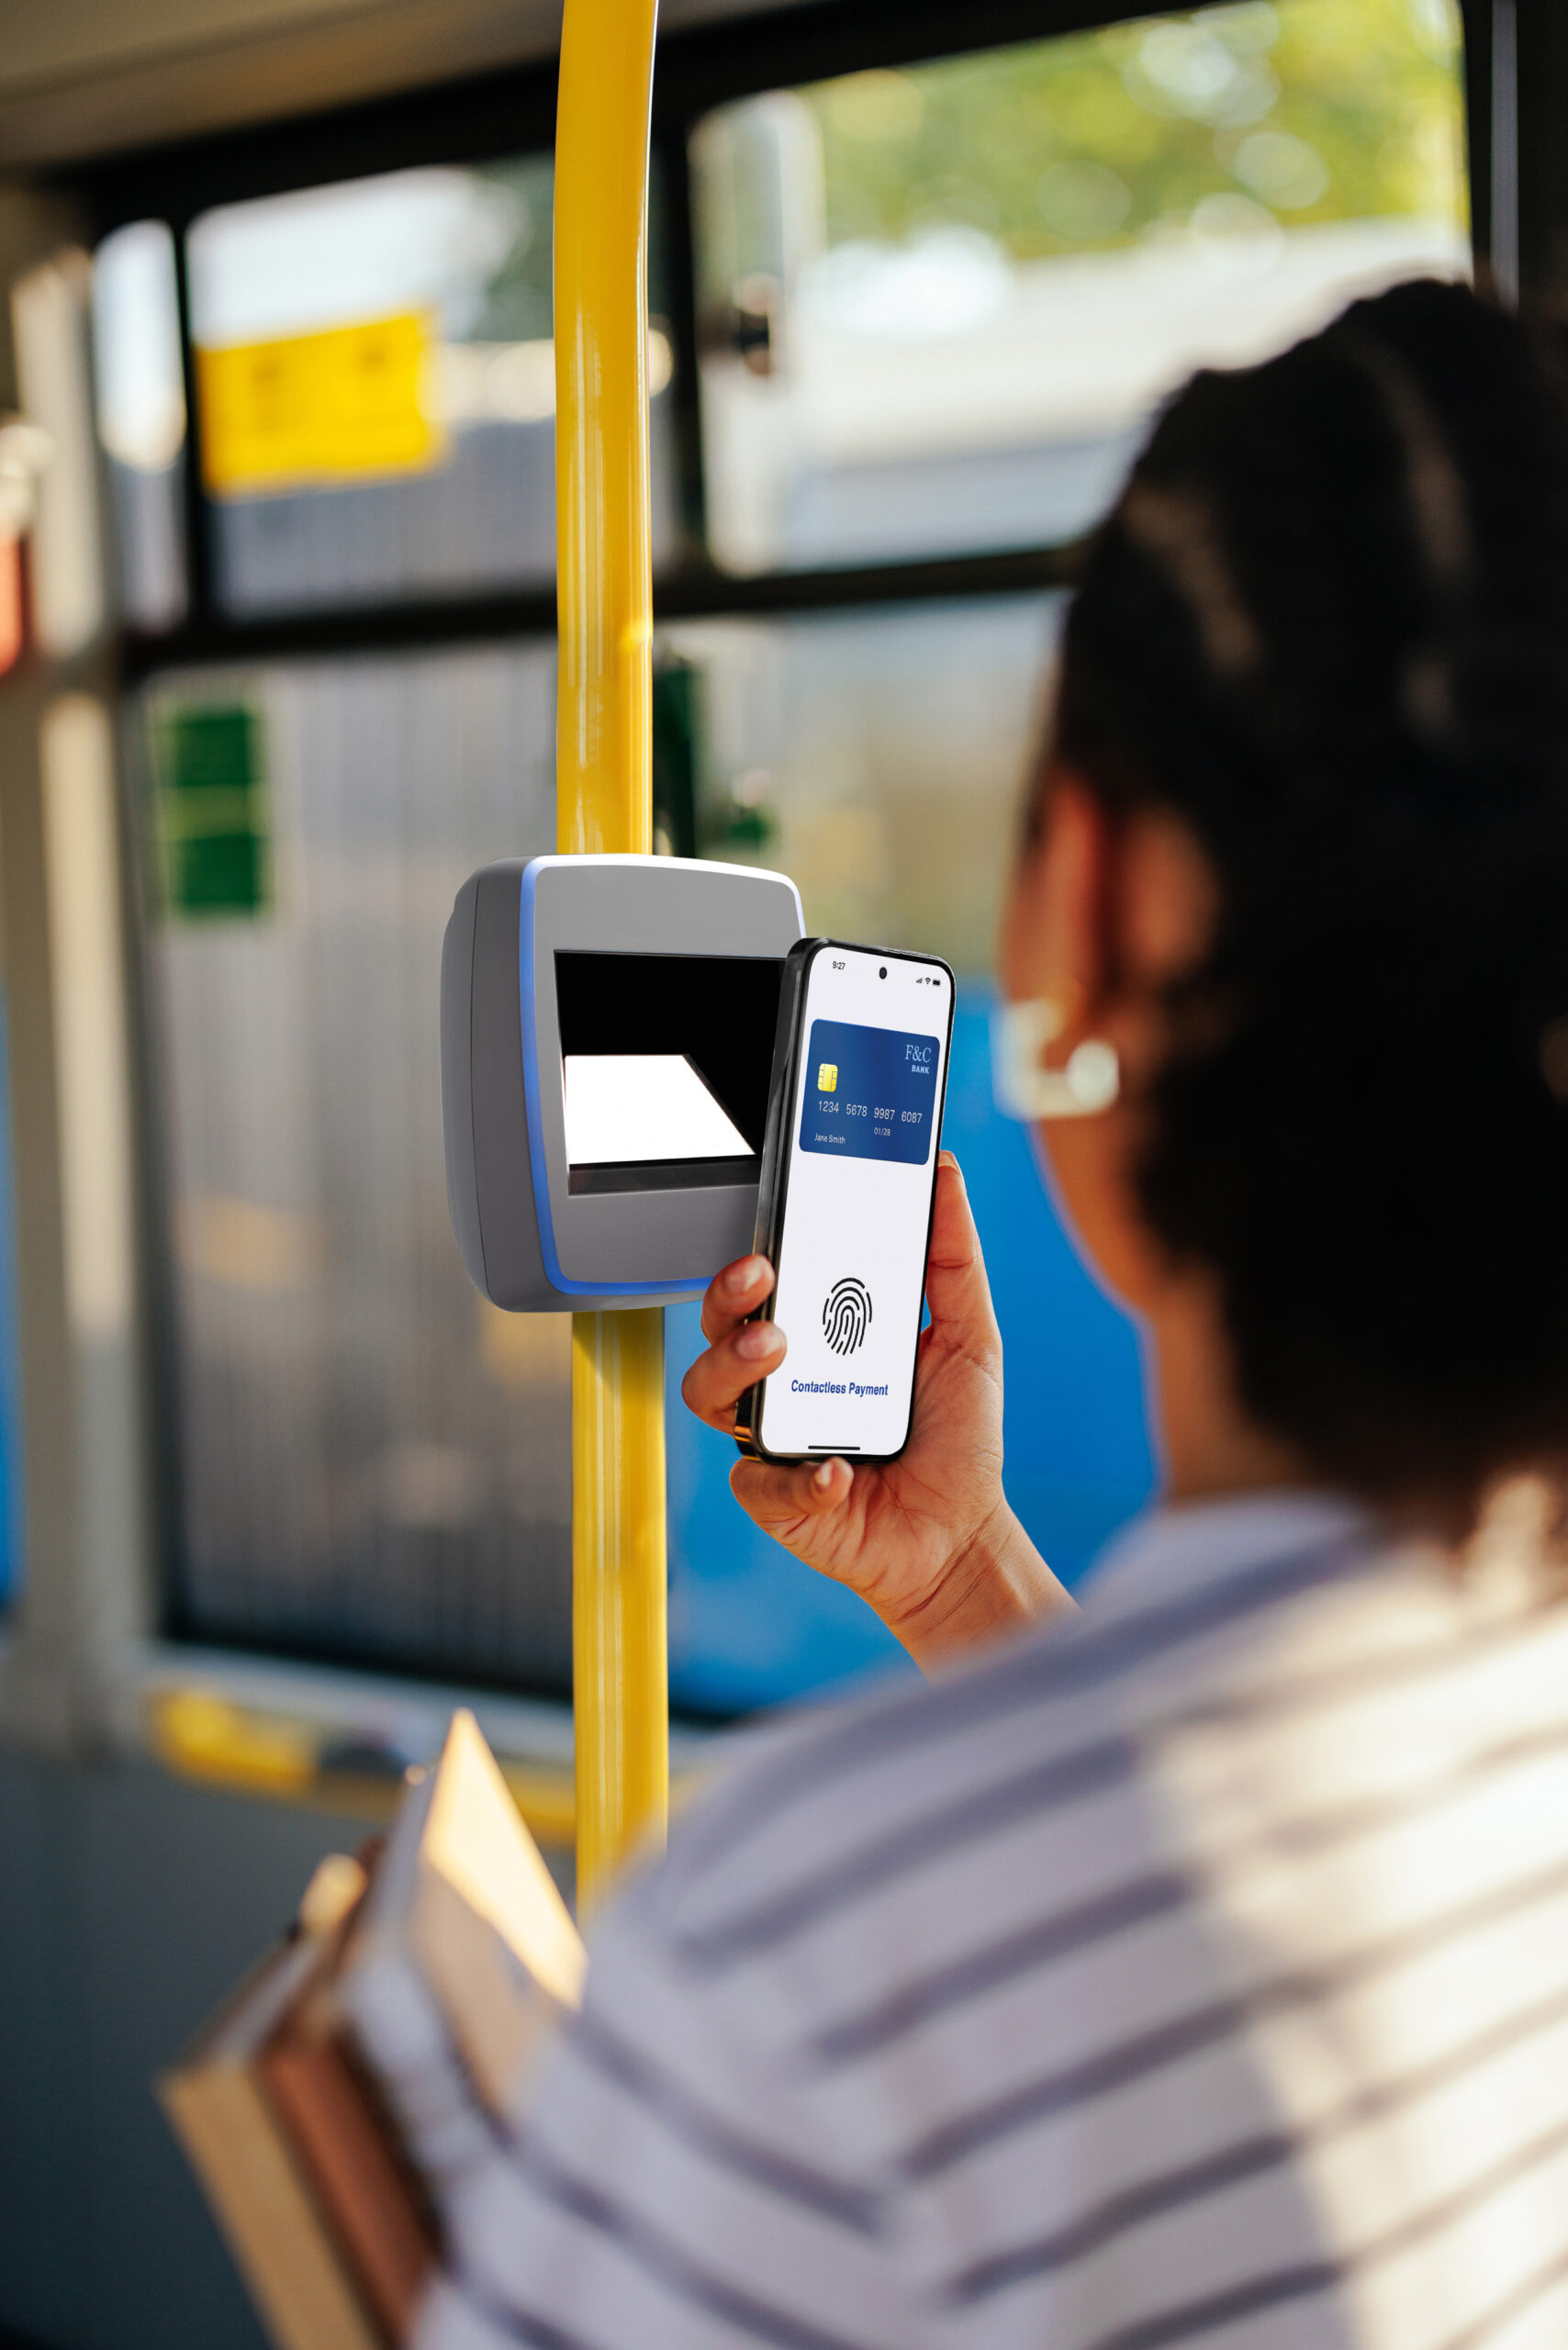 HID TripTick Halo – Ticket readers with optional contactless payment capability